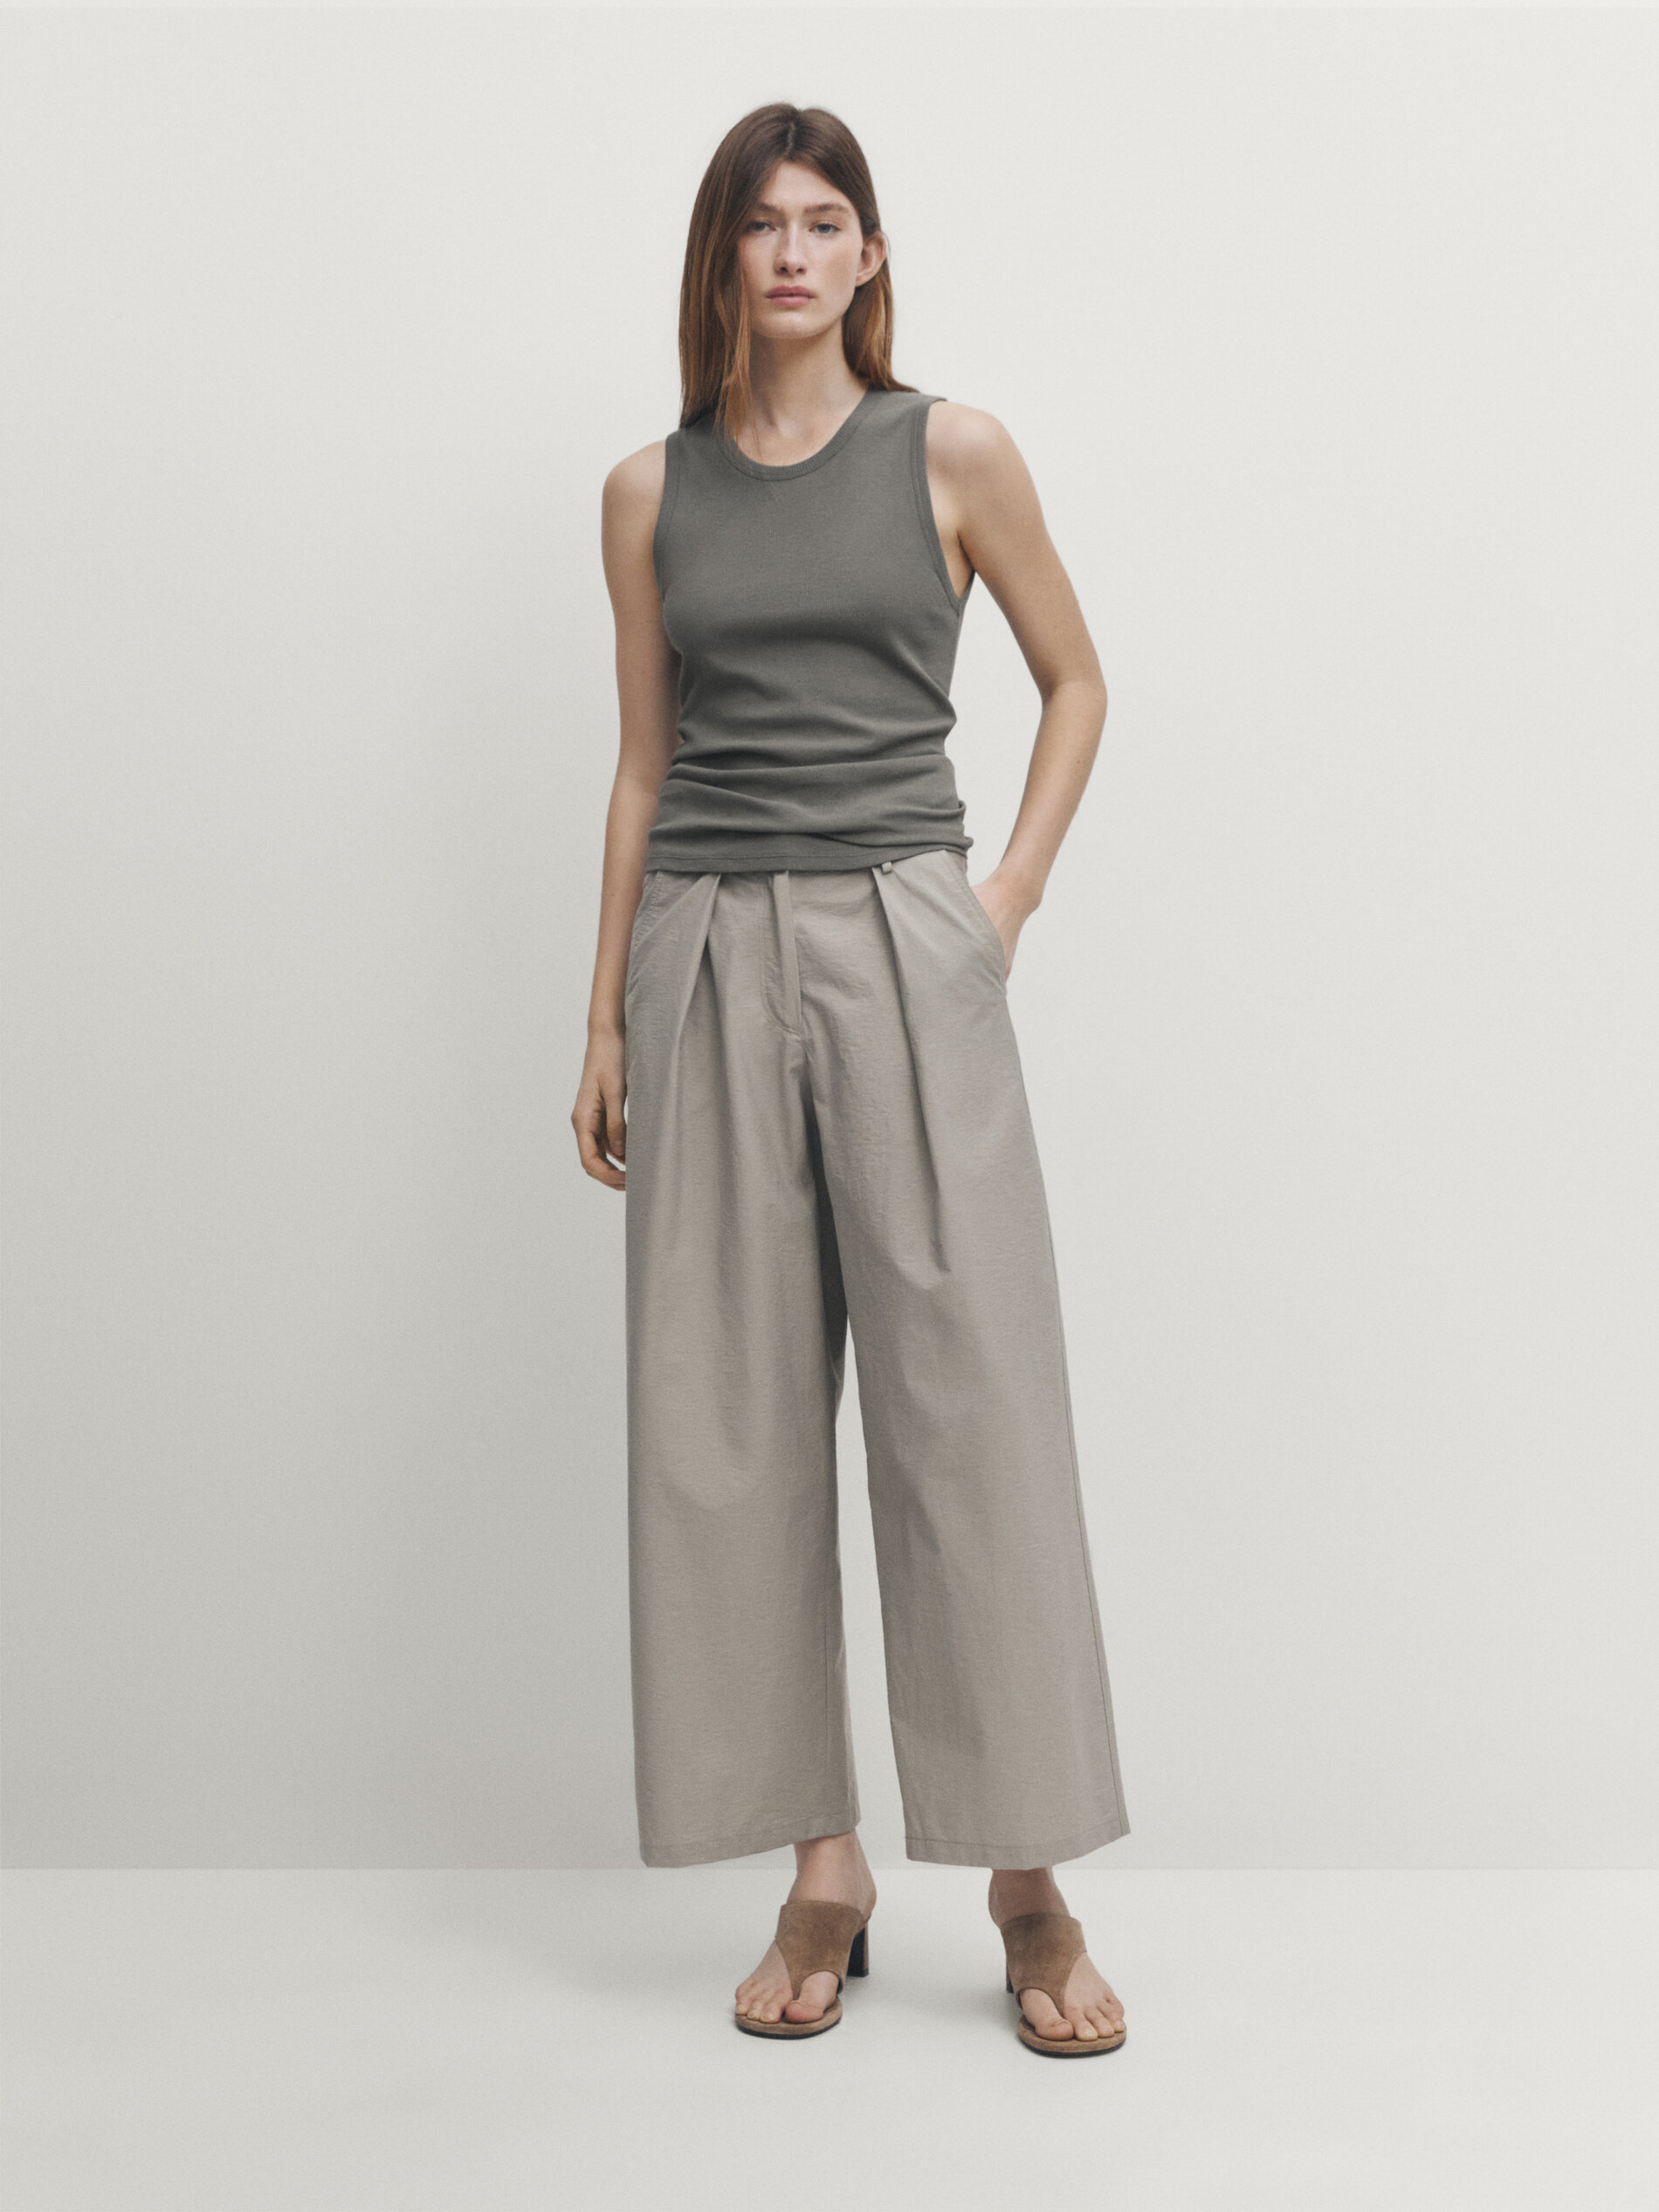 Massimo Dutti Sleeveless Halter Top With Ribbed Detail In Graugrün